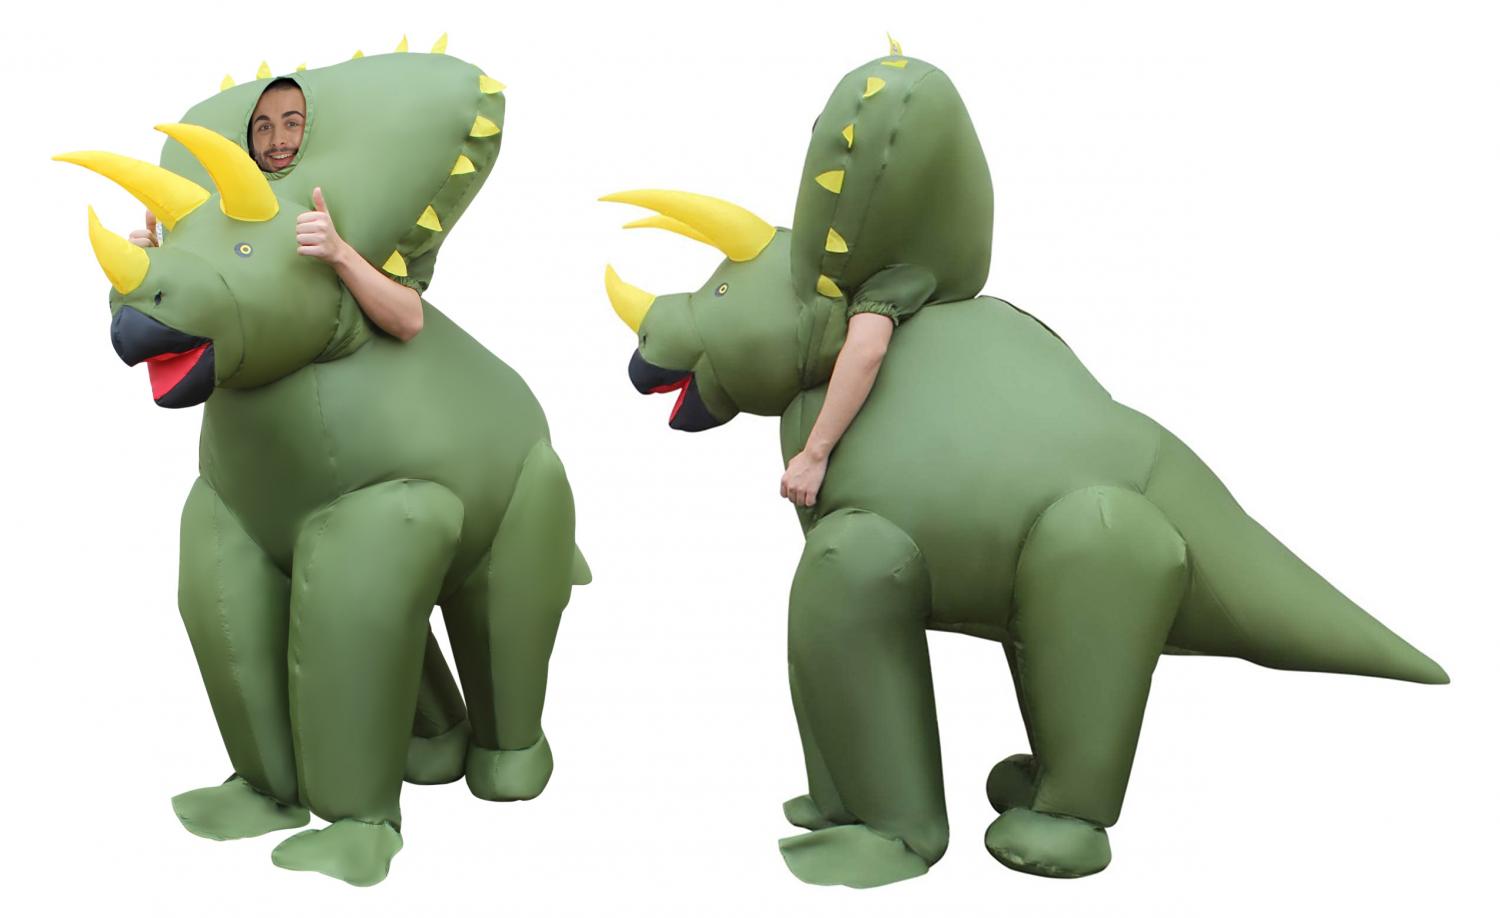 Giant Inflatable Triceratops Dinosaur Costume